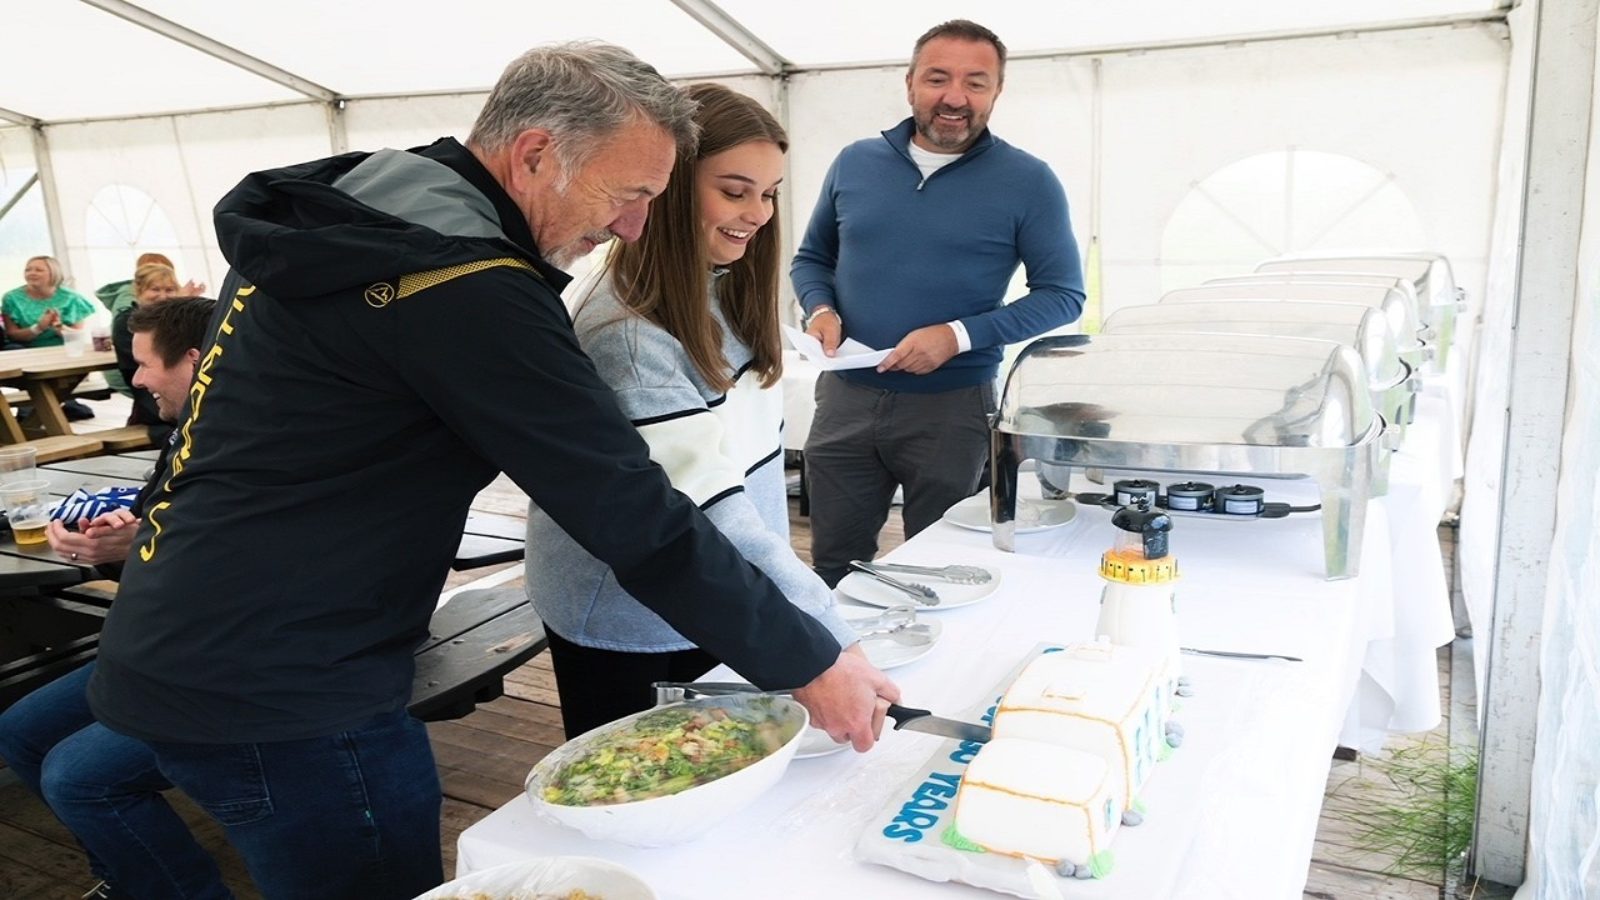 GS Group toasted its 30th anniversary with a family day at the Crieff Hydro Hotel